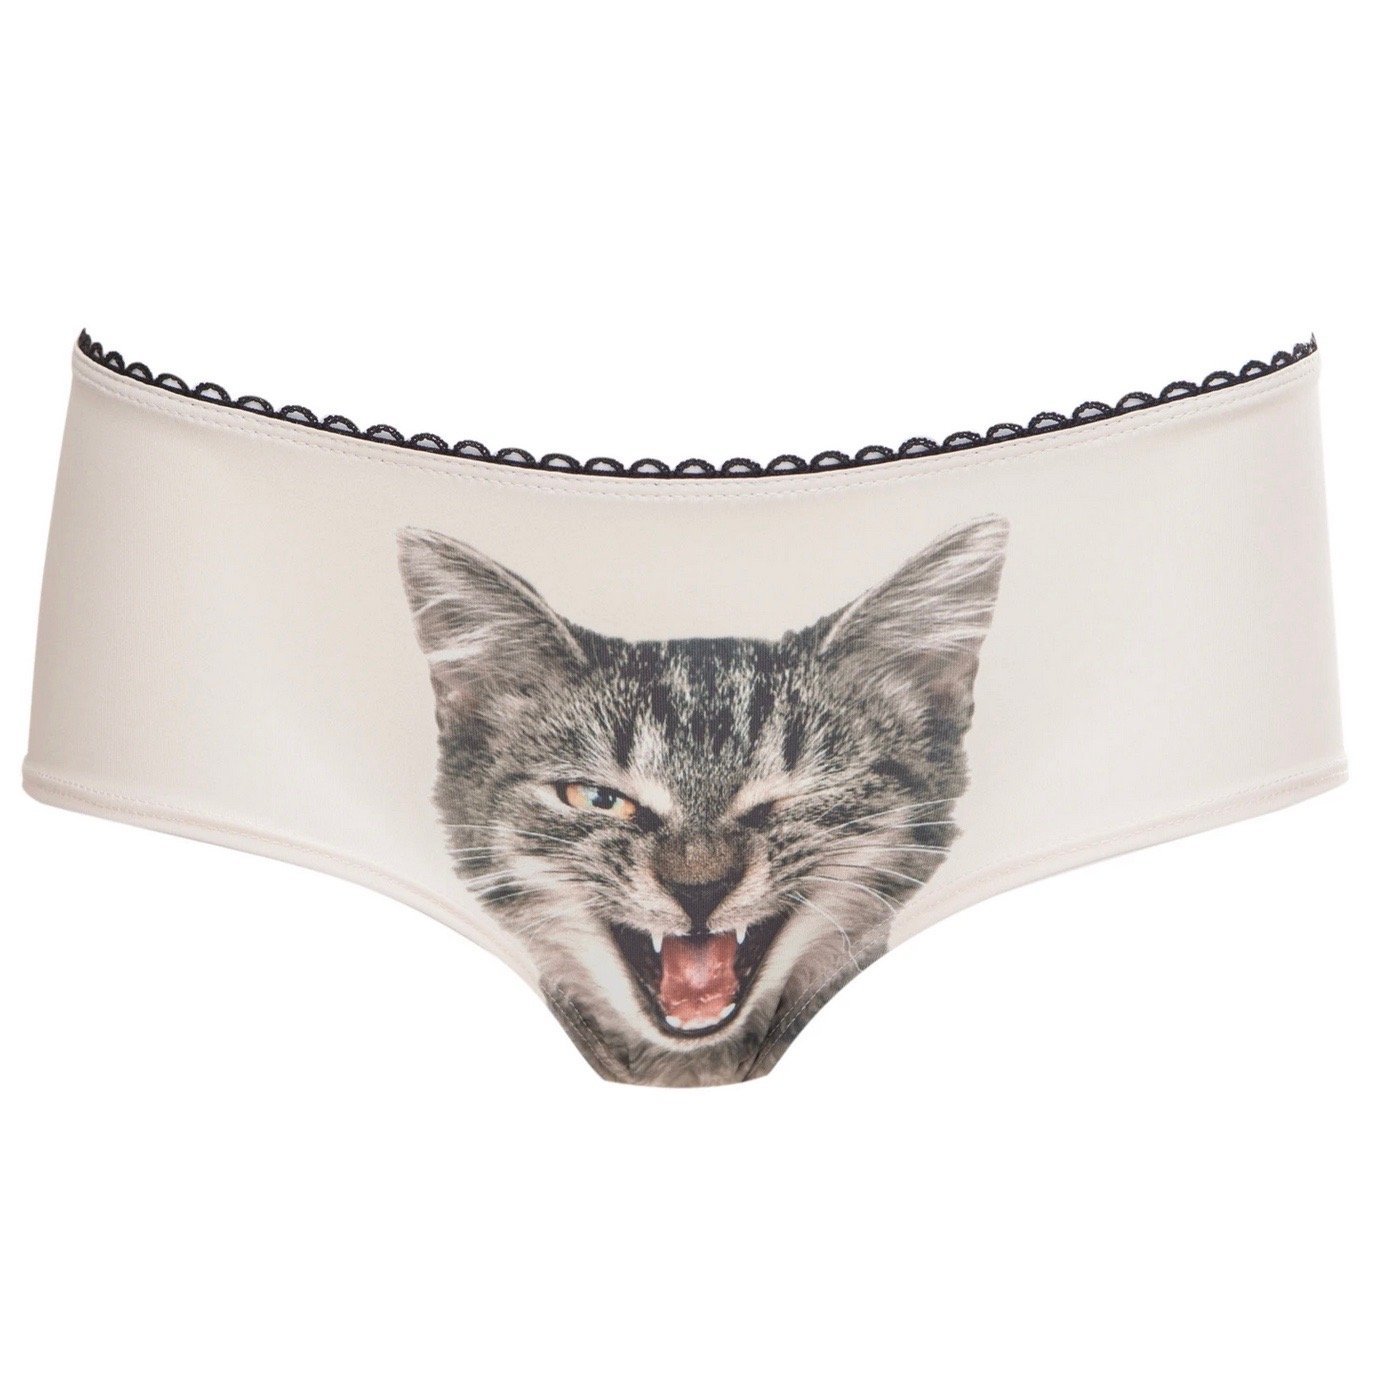 PUSSYCAT PANTIES- Start with a wink - ONNA